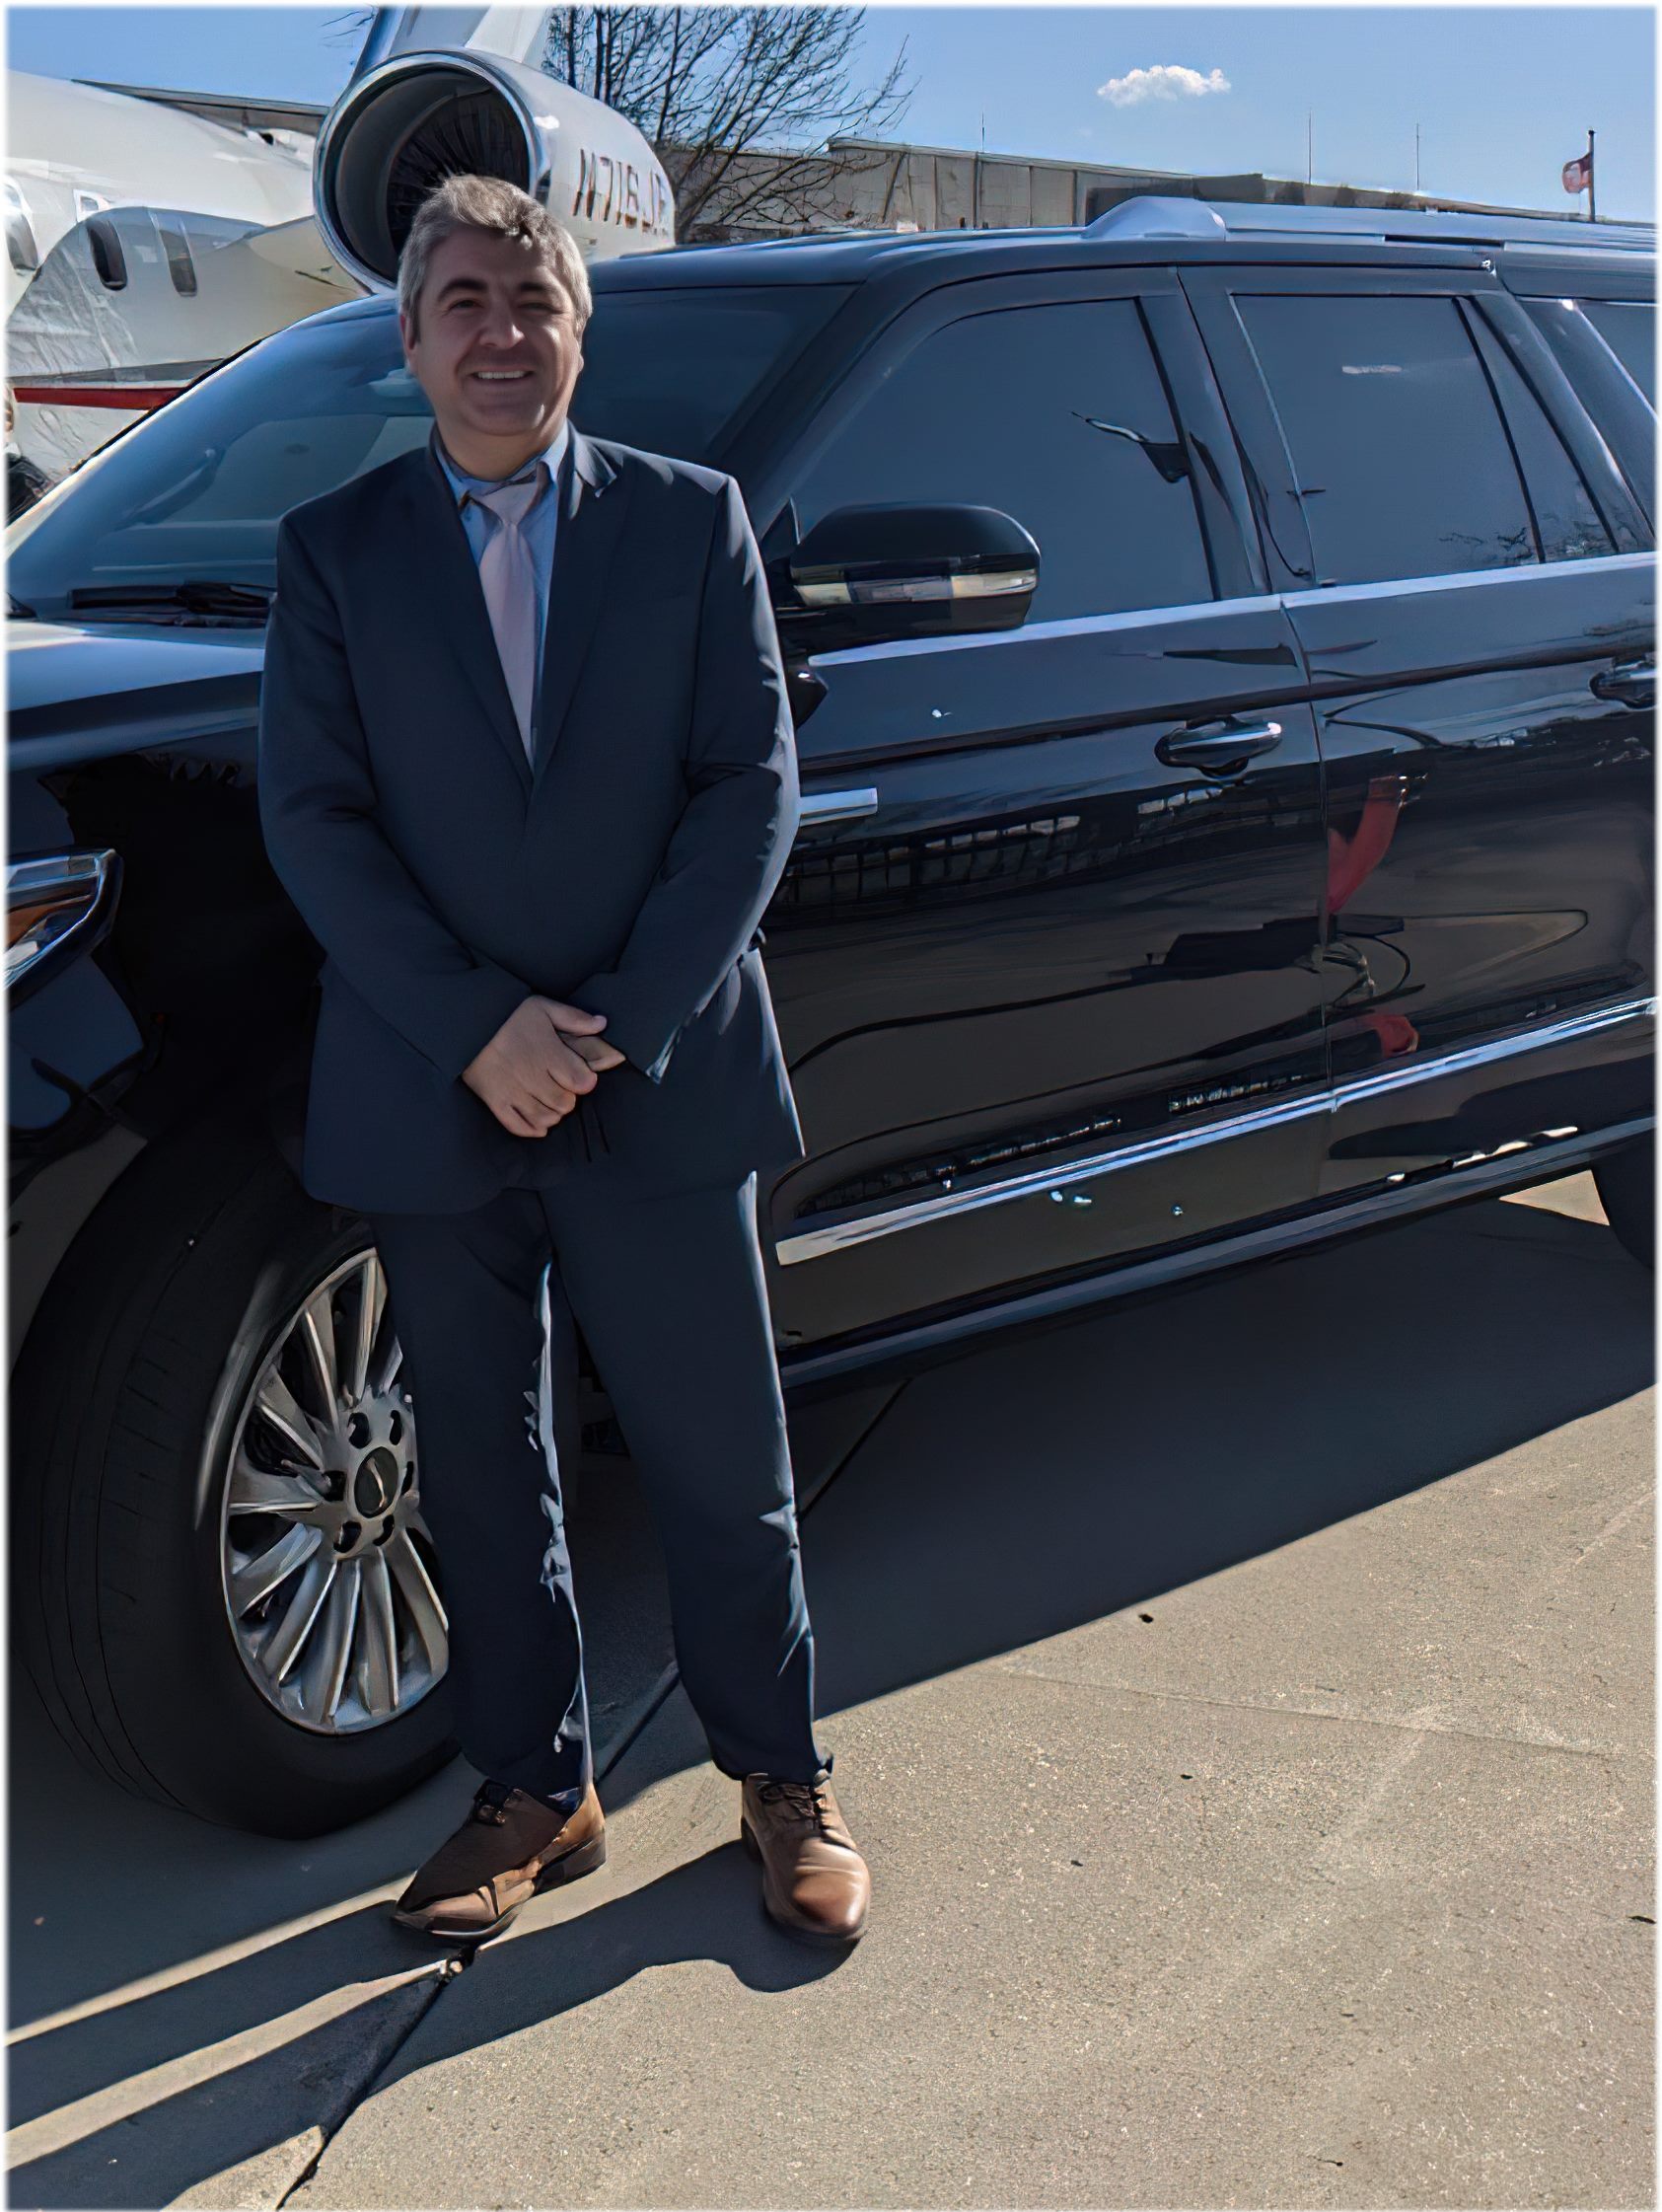 Skyline VIP Limo Announces Premier Limo Services For Business and Leisure Travelers in NYC